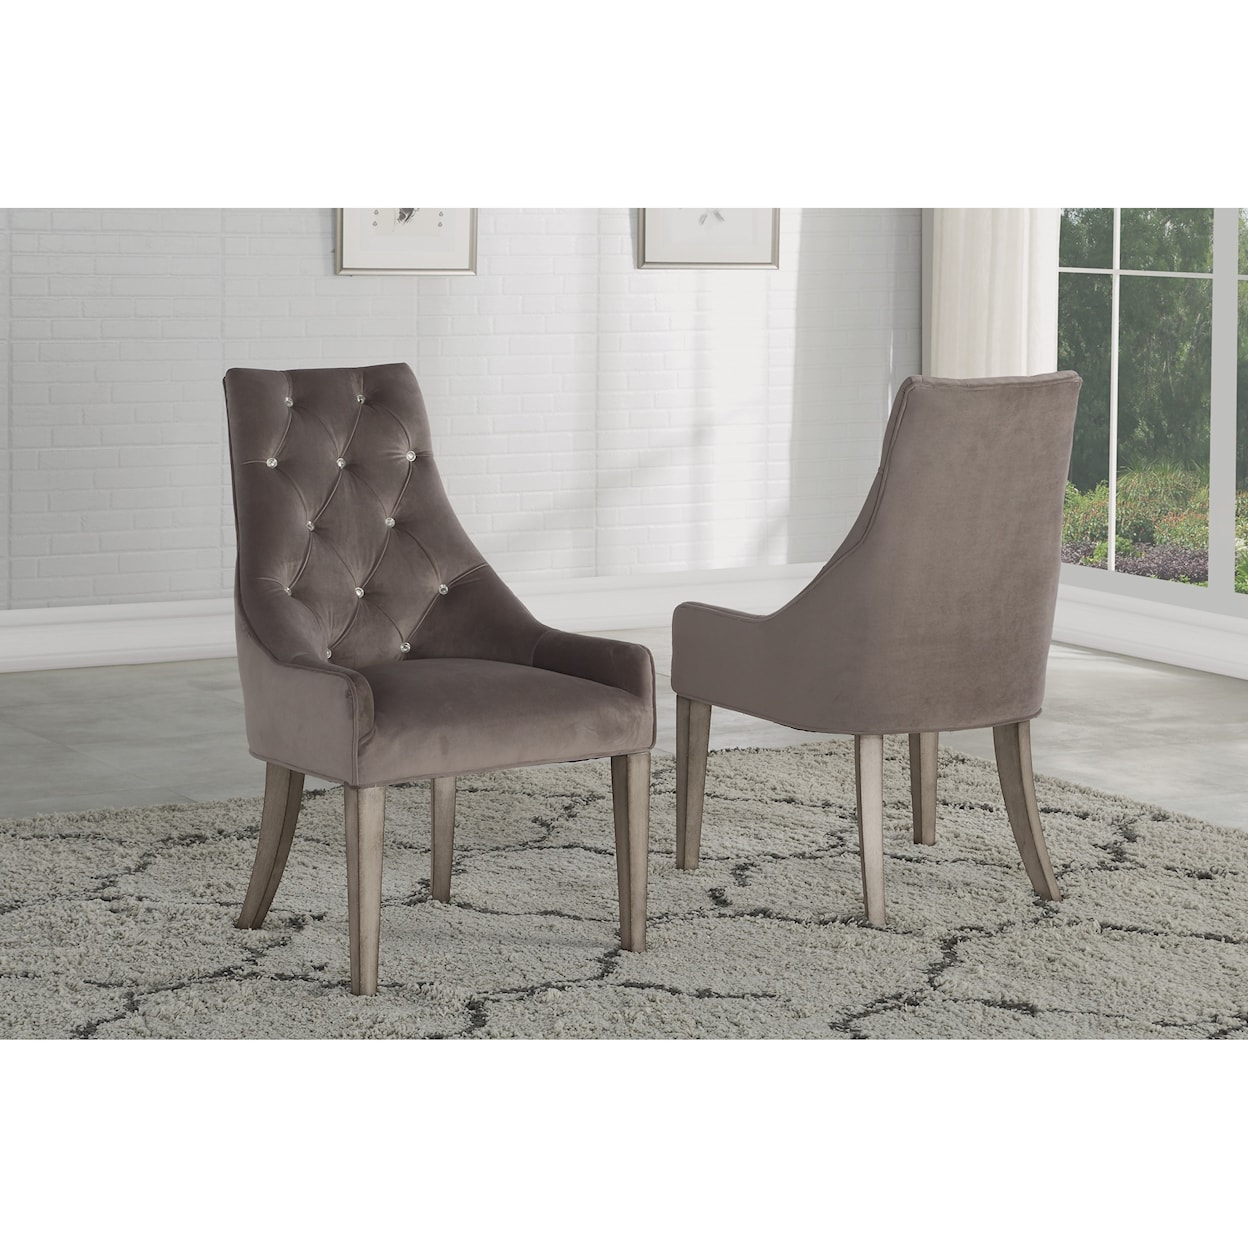 Wynwood, A Flexsteel Company Vogue Upholstered Arm Chair